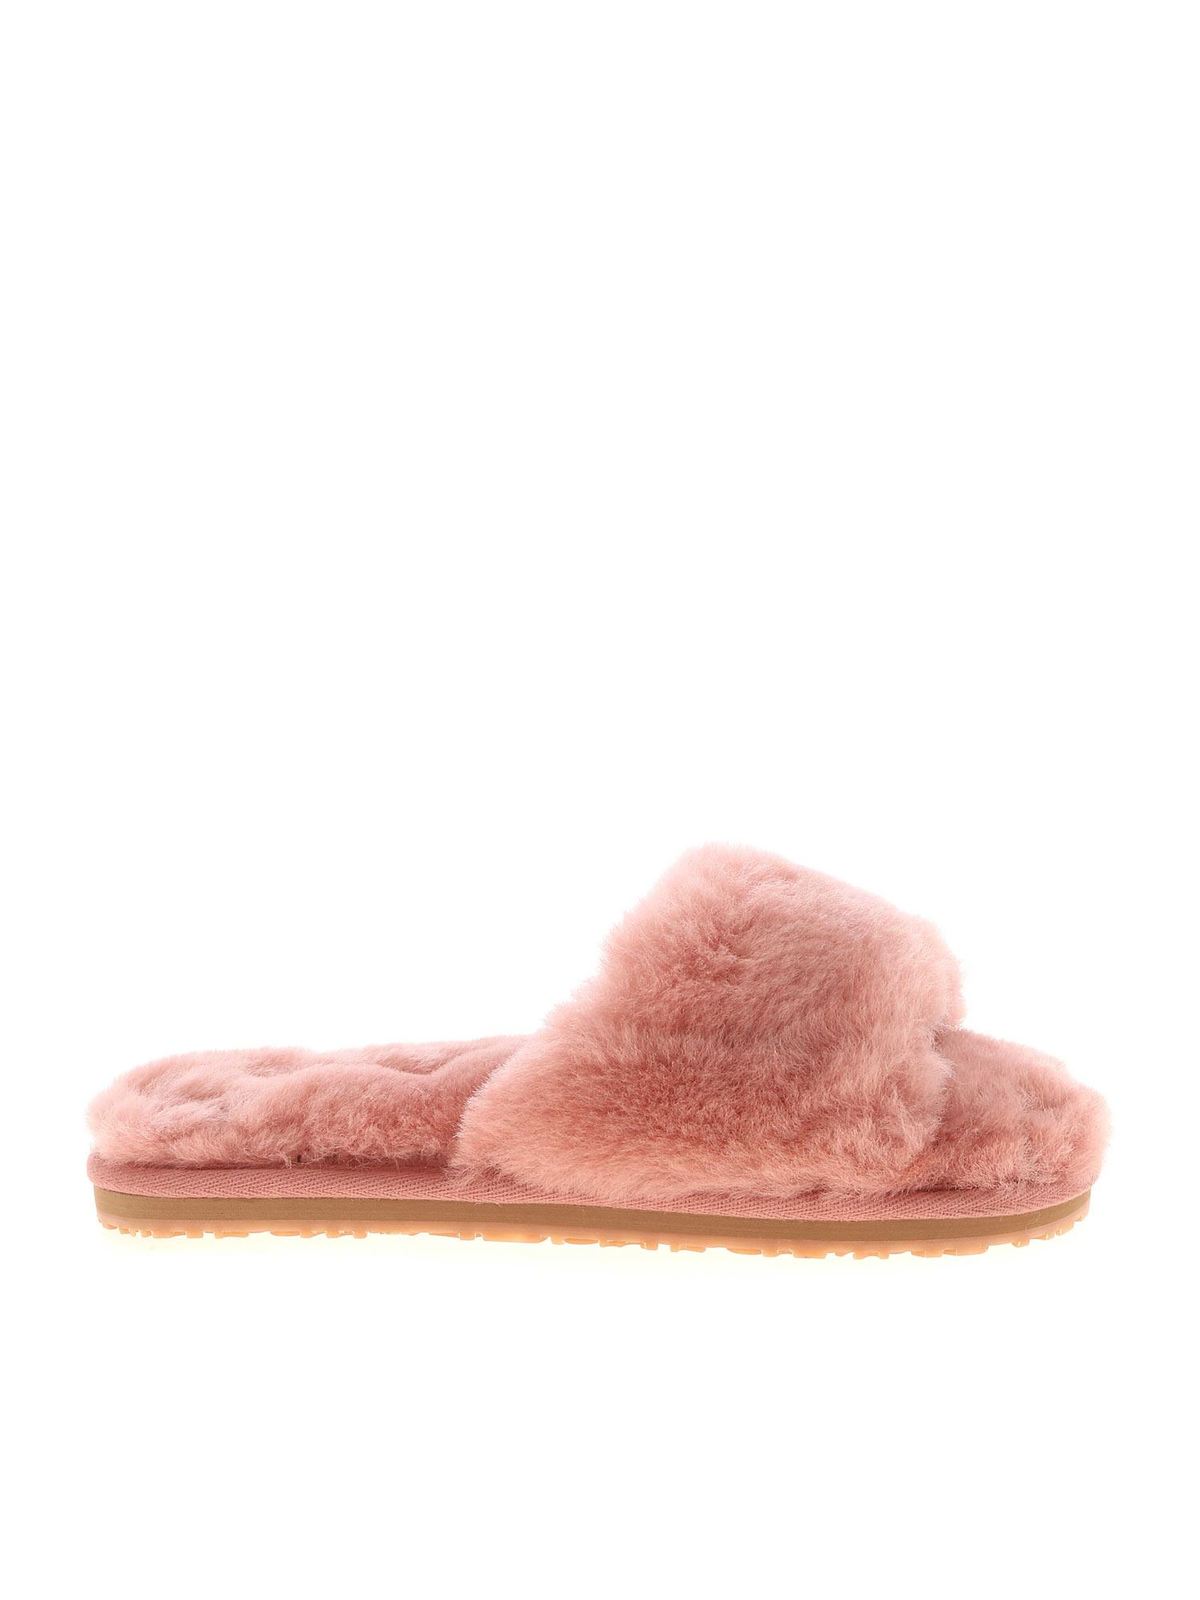 mou mou slippers